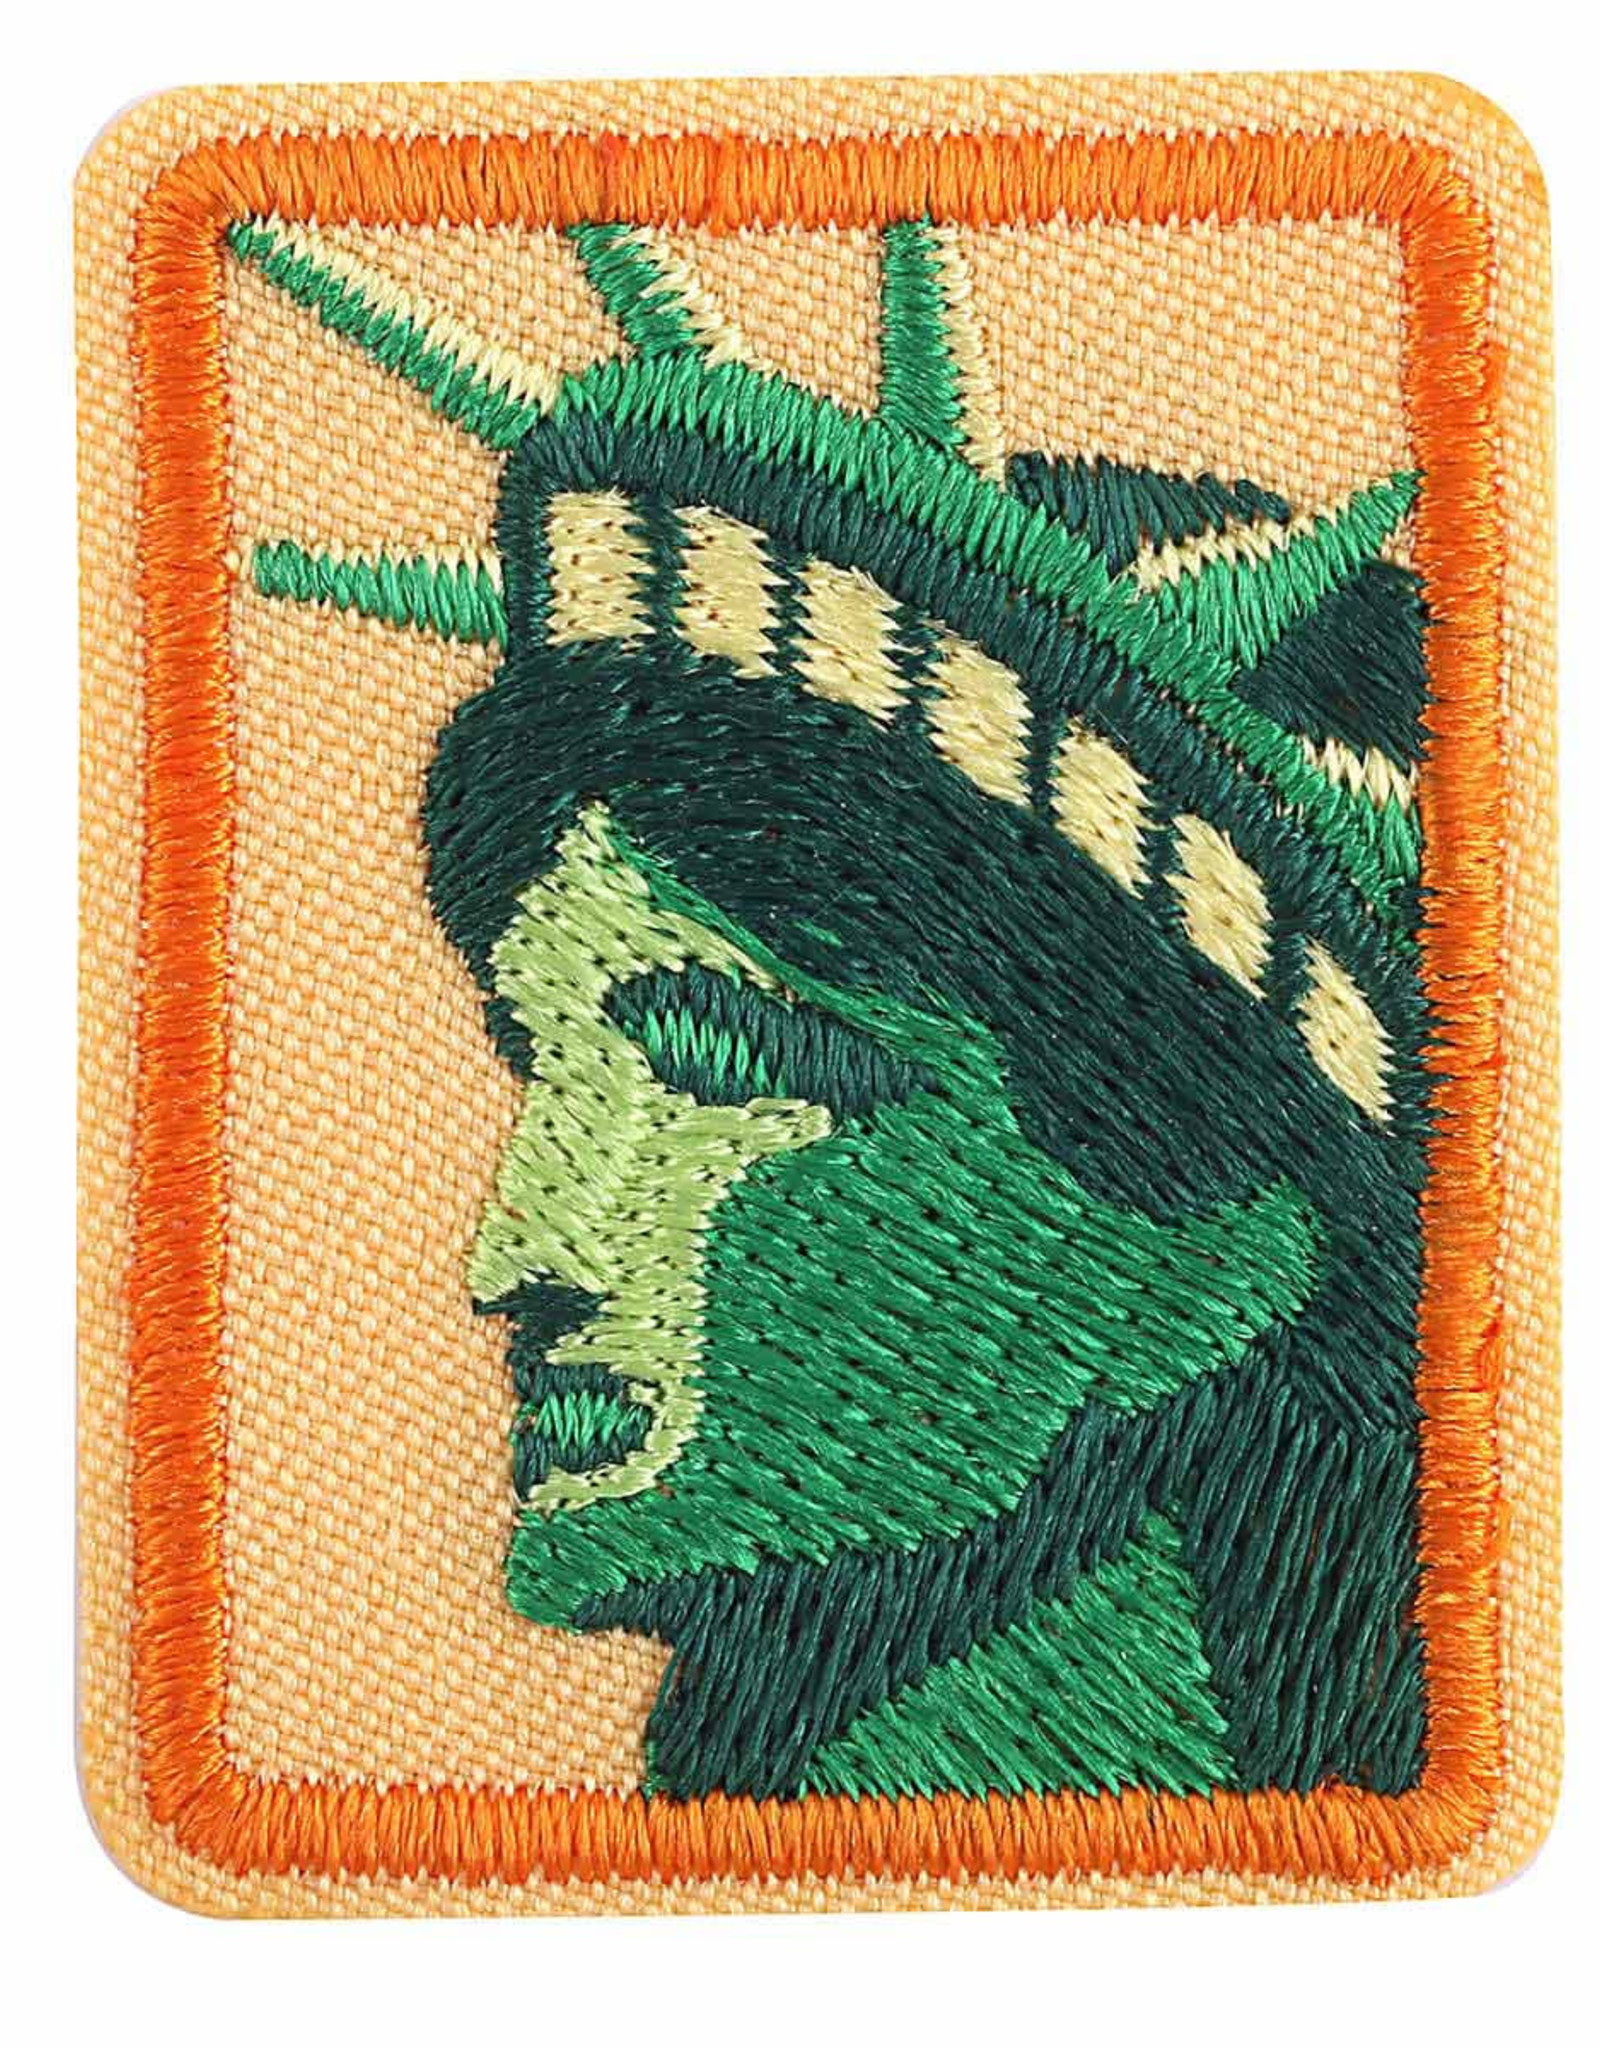 GIRL SCOUTS OF THE USA Democracy for Seniors Badge